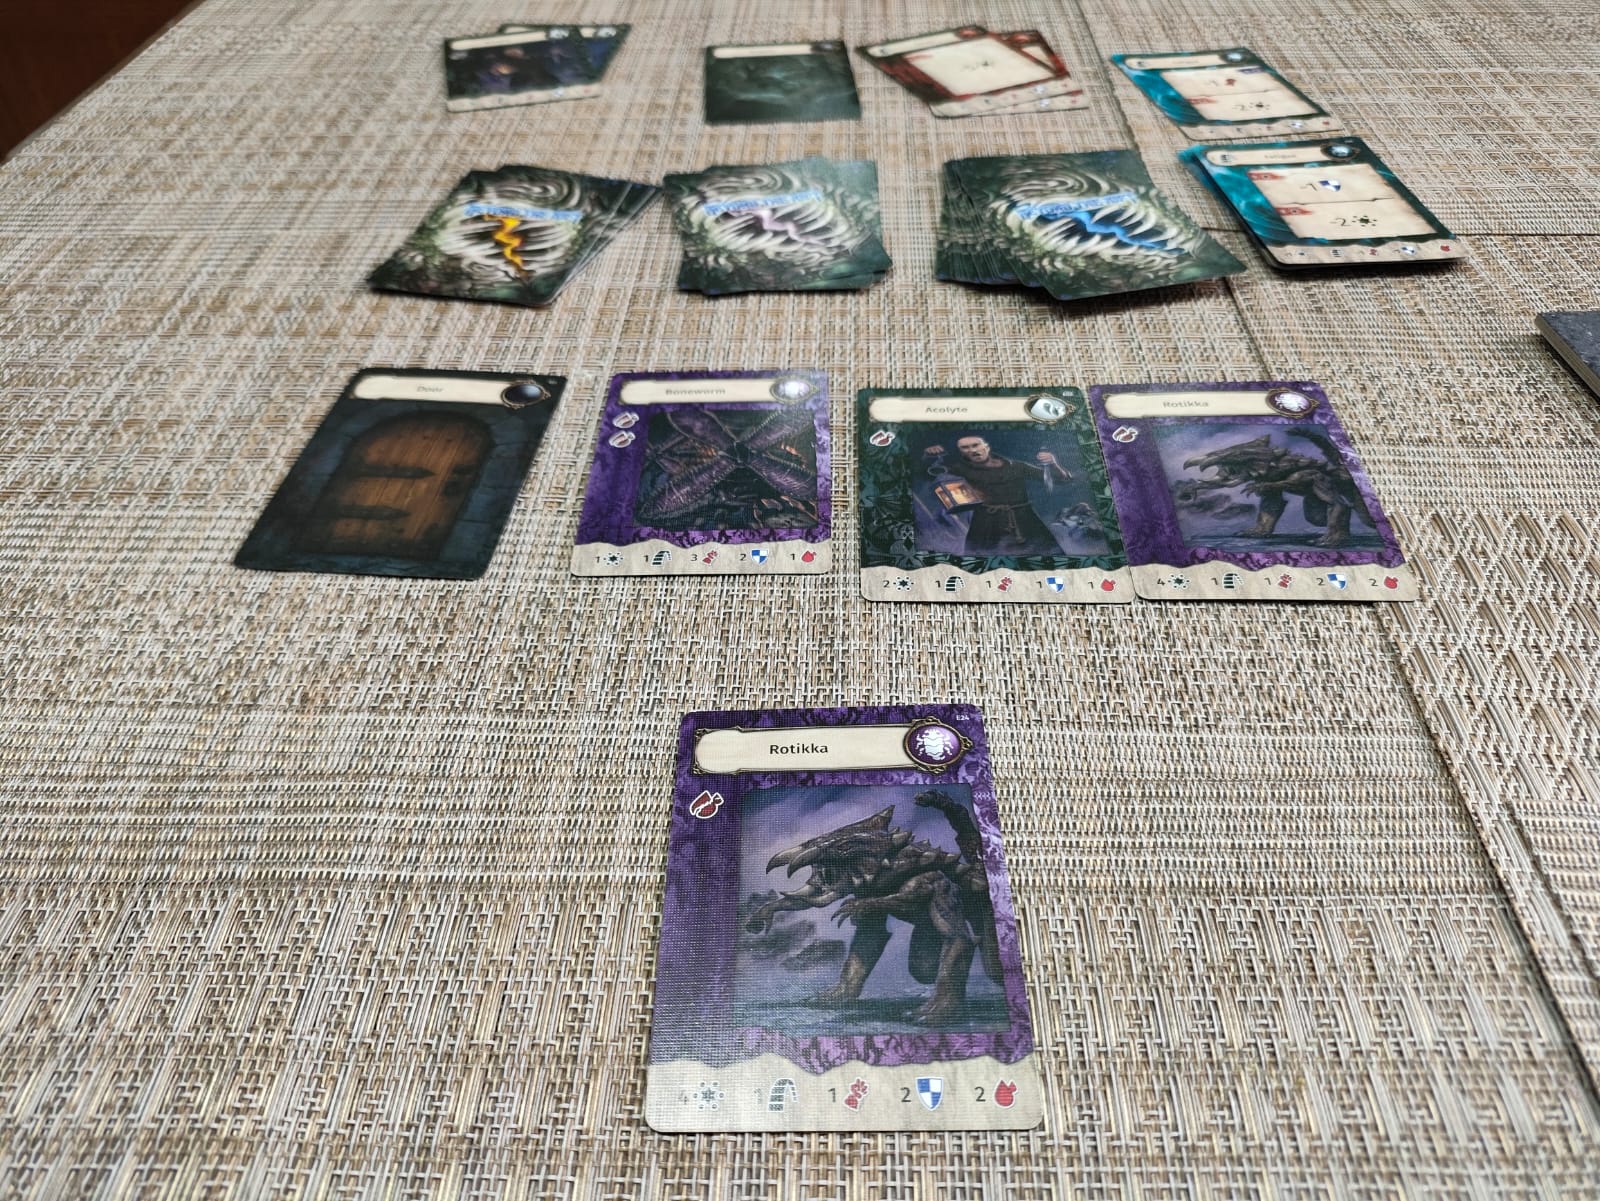 Reseña Beyond the Rift: A Perdition's Mouth Card Game 47